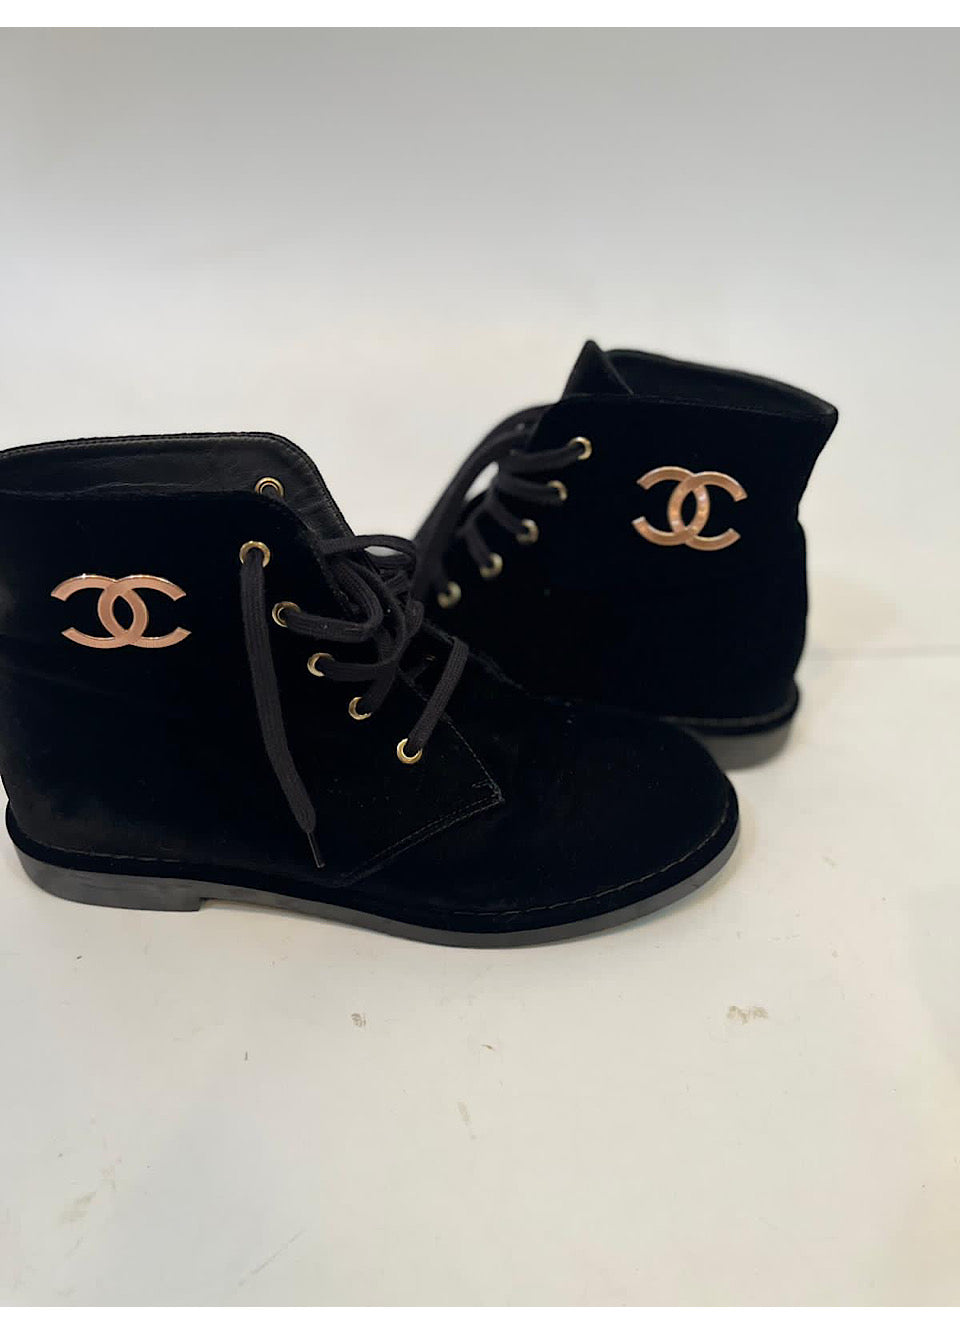 Chanel Black Suede Lace Up Ankle Boots